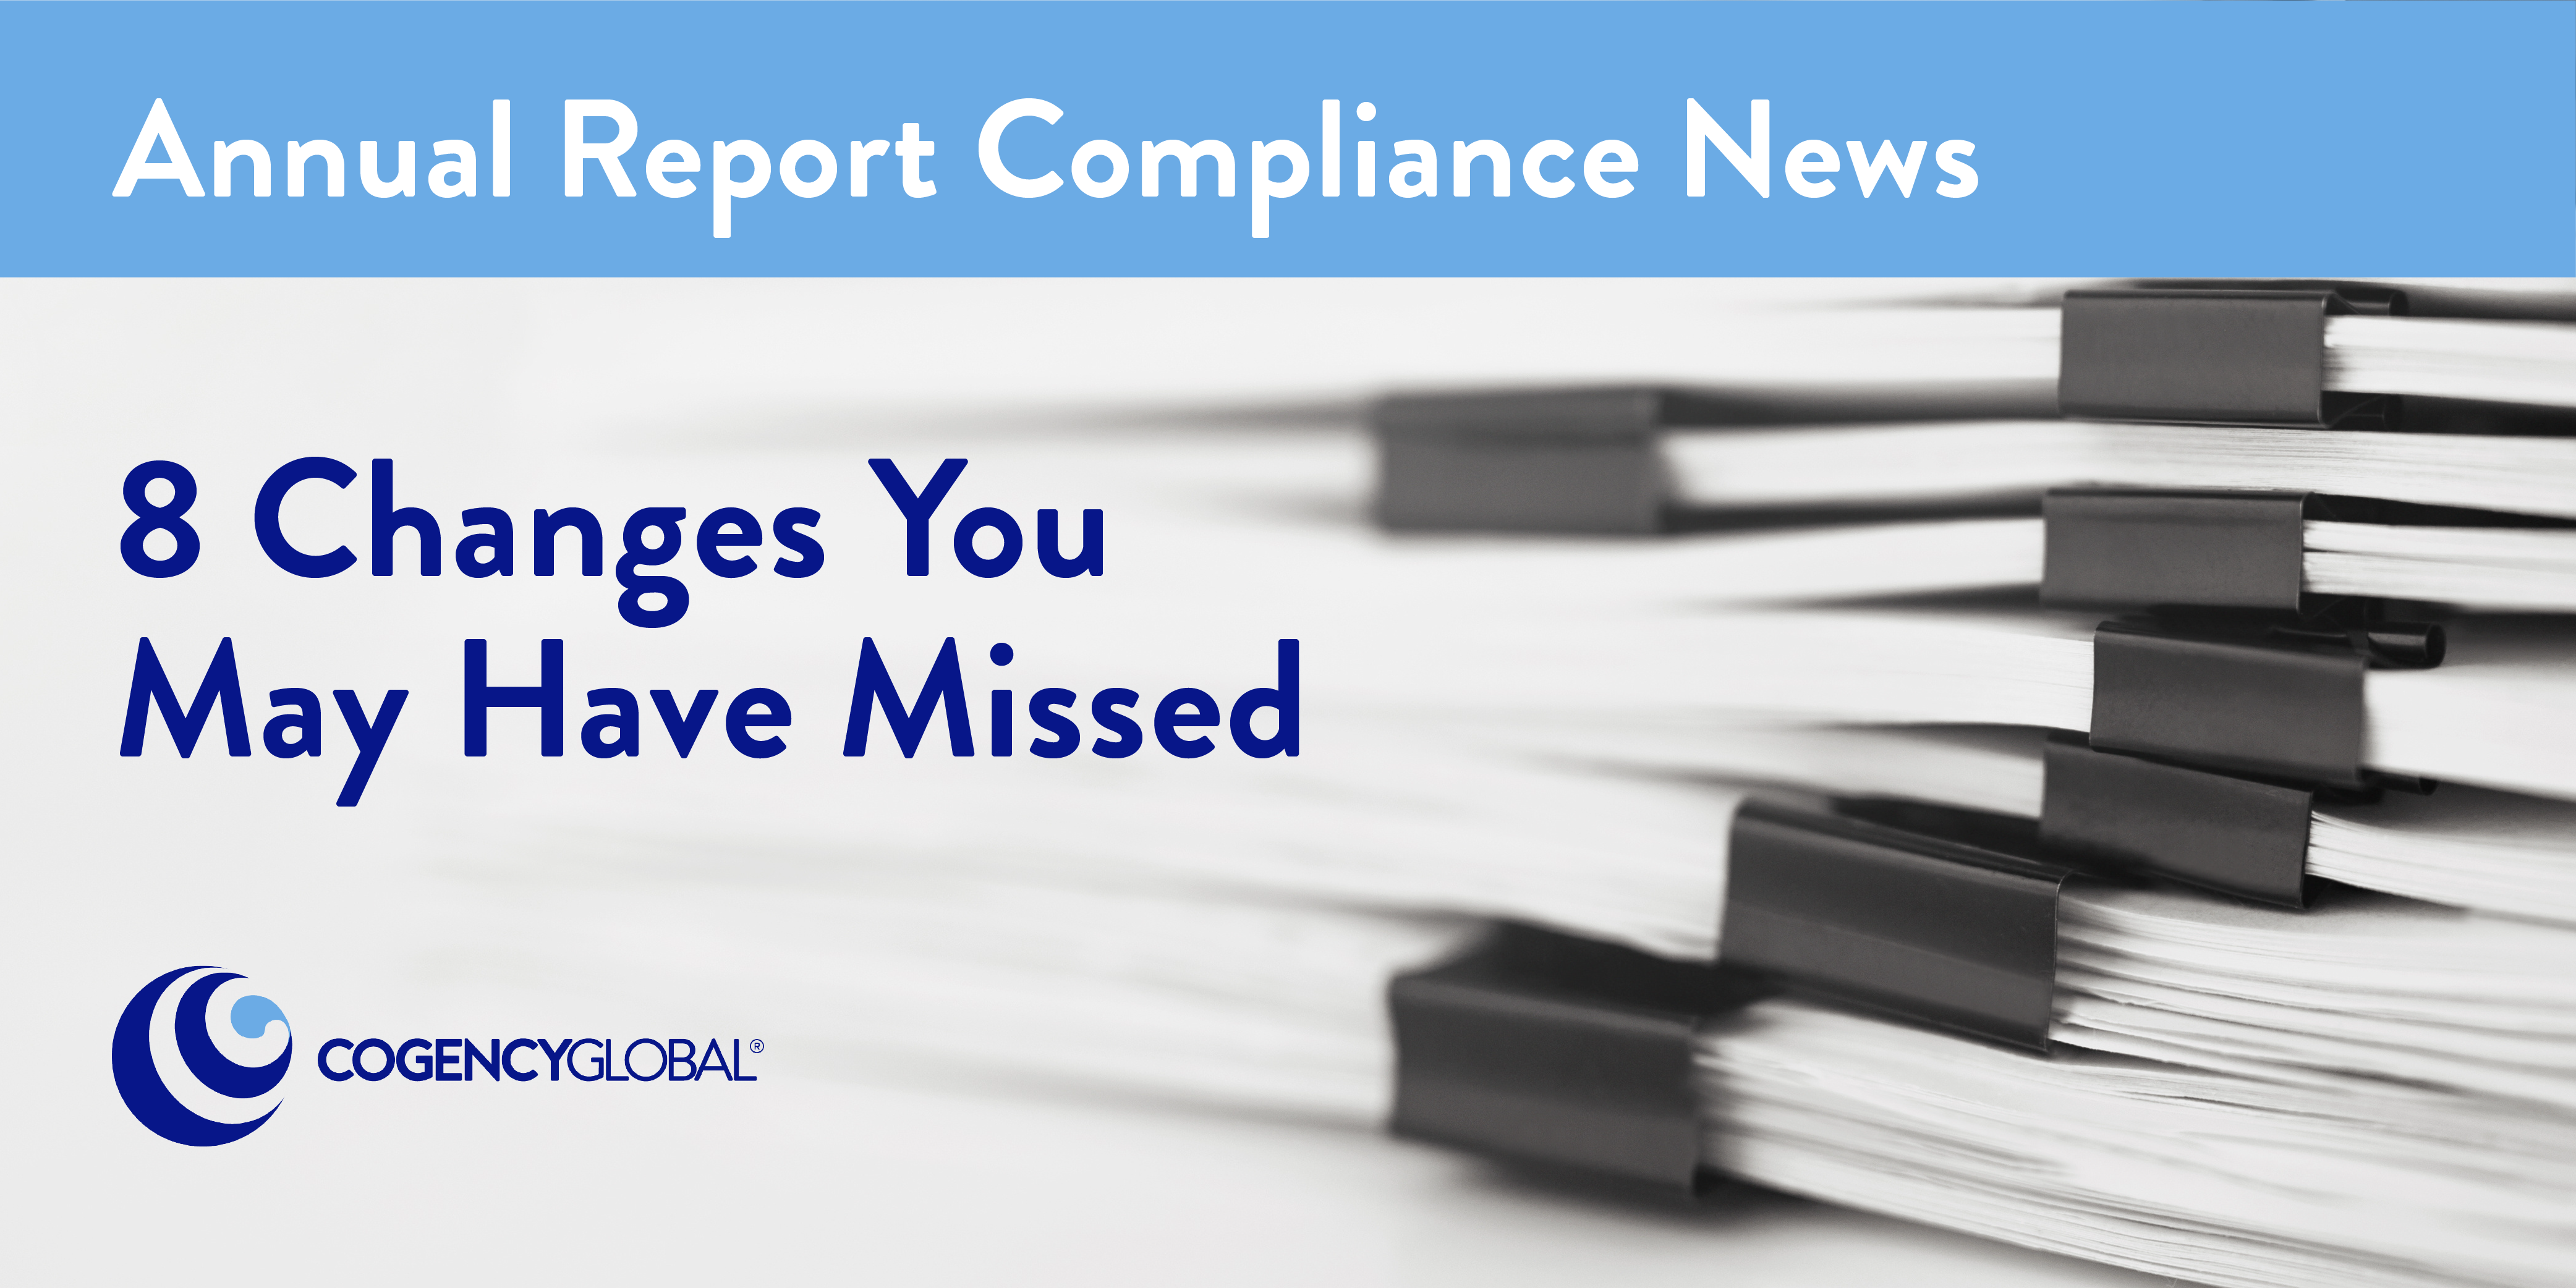 Annual Report Compliance News: 8 Changes You May have Missed